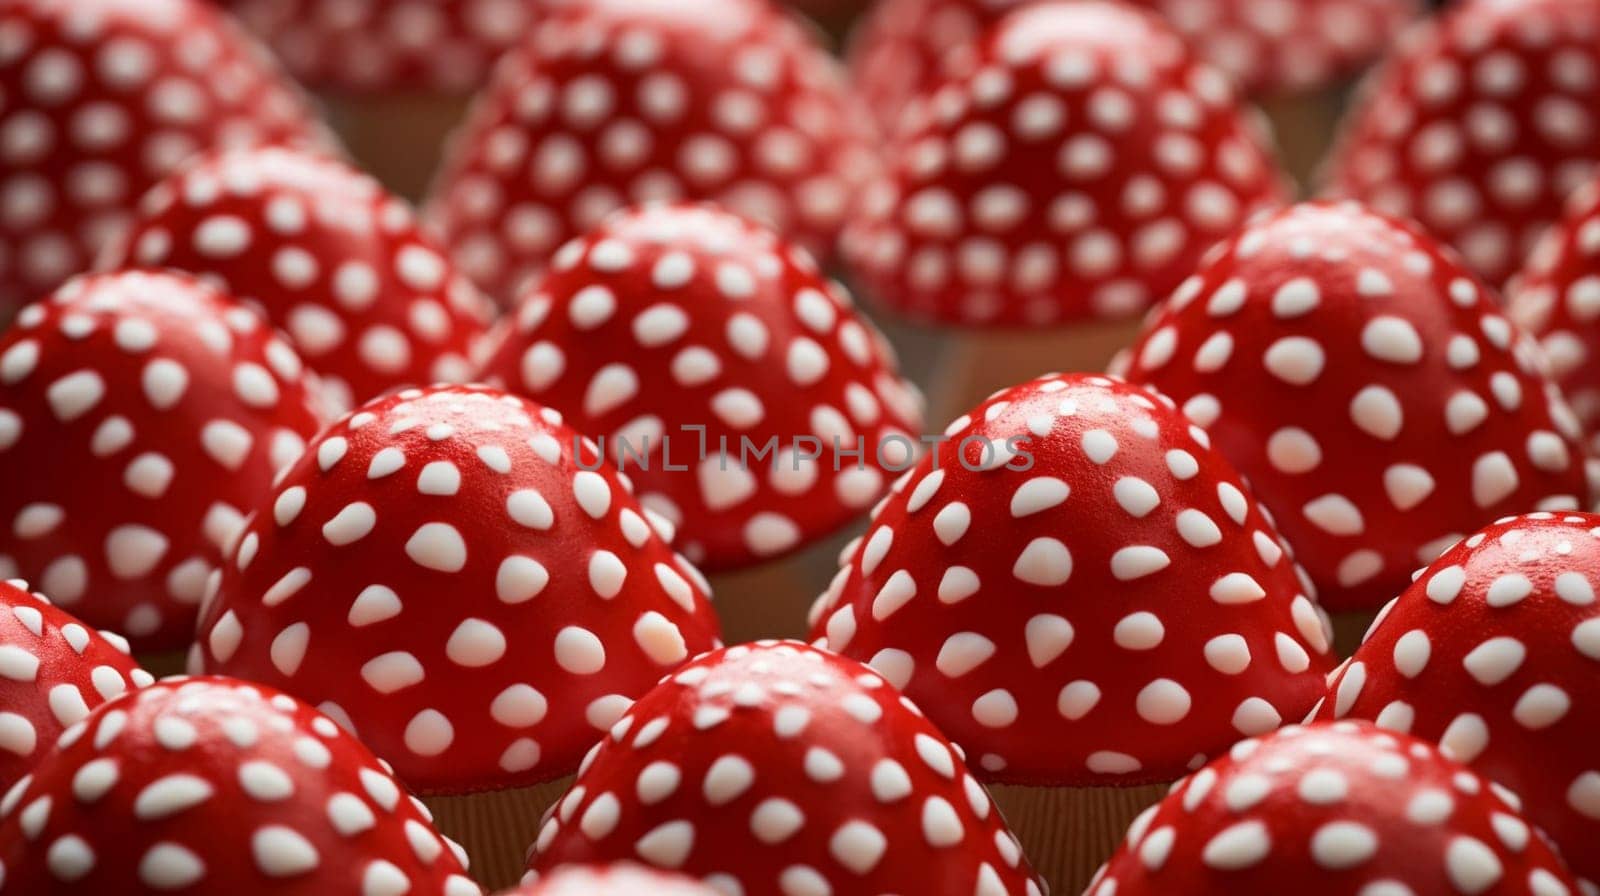 Vibrant red mushrooms with white spots, close-up, with a blurry background by kizuneko